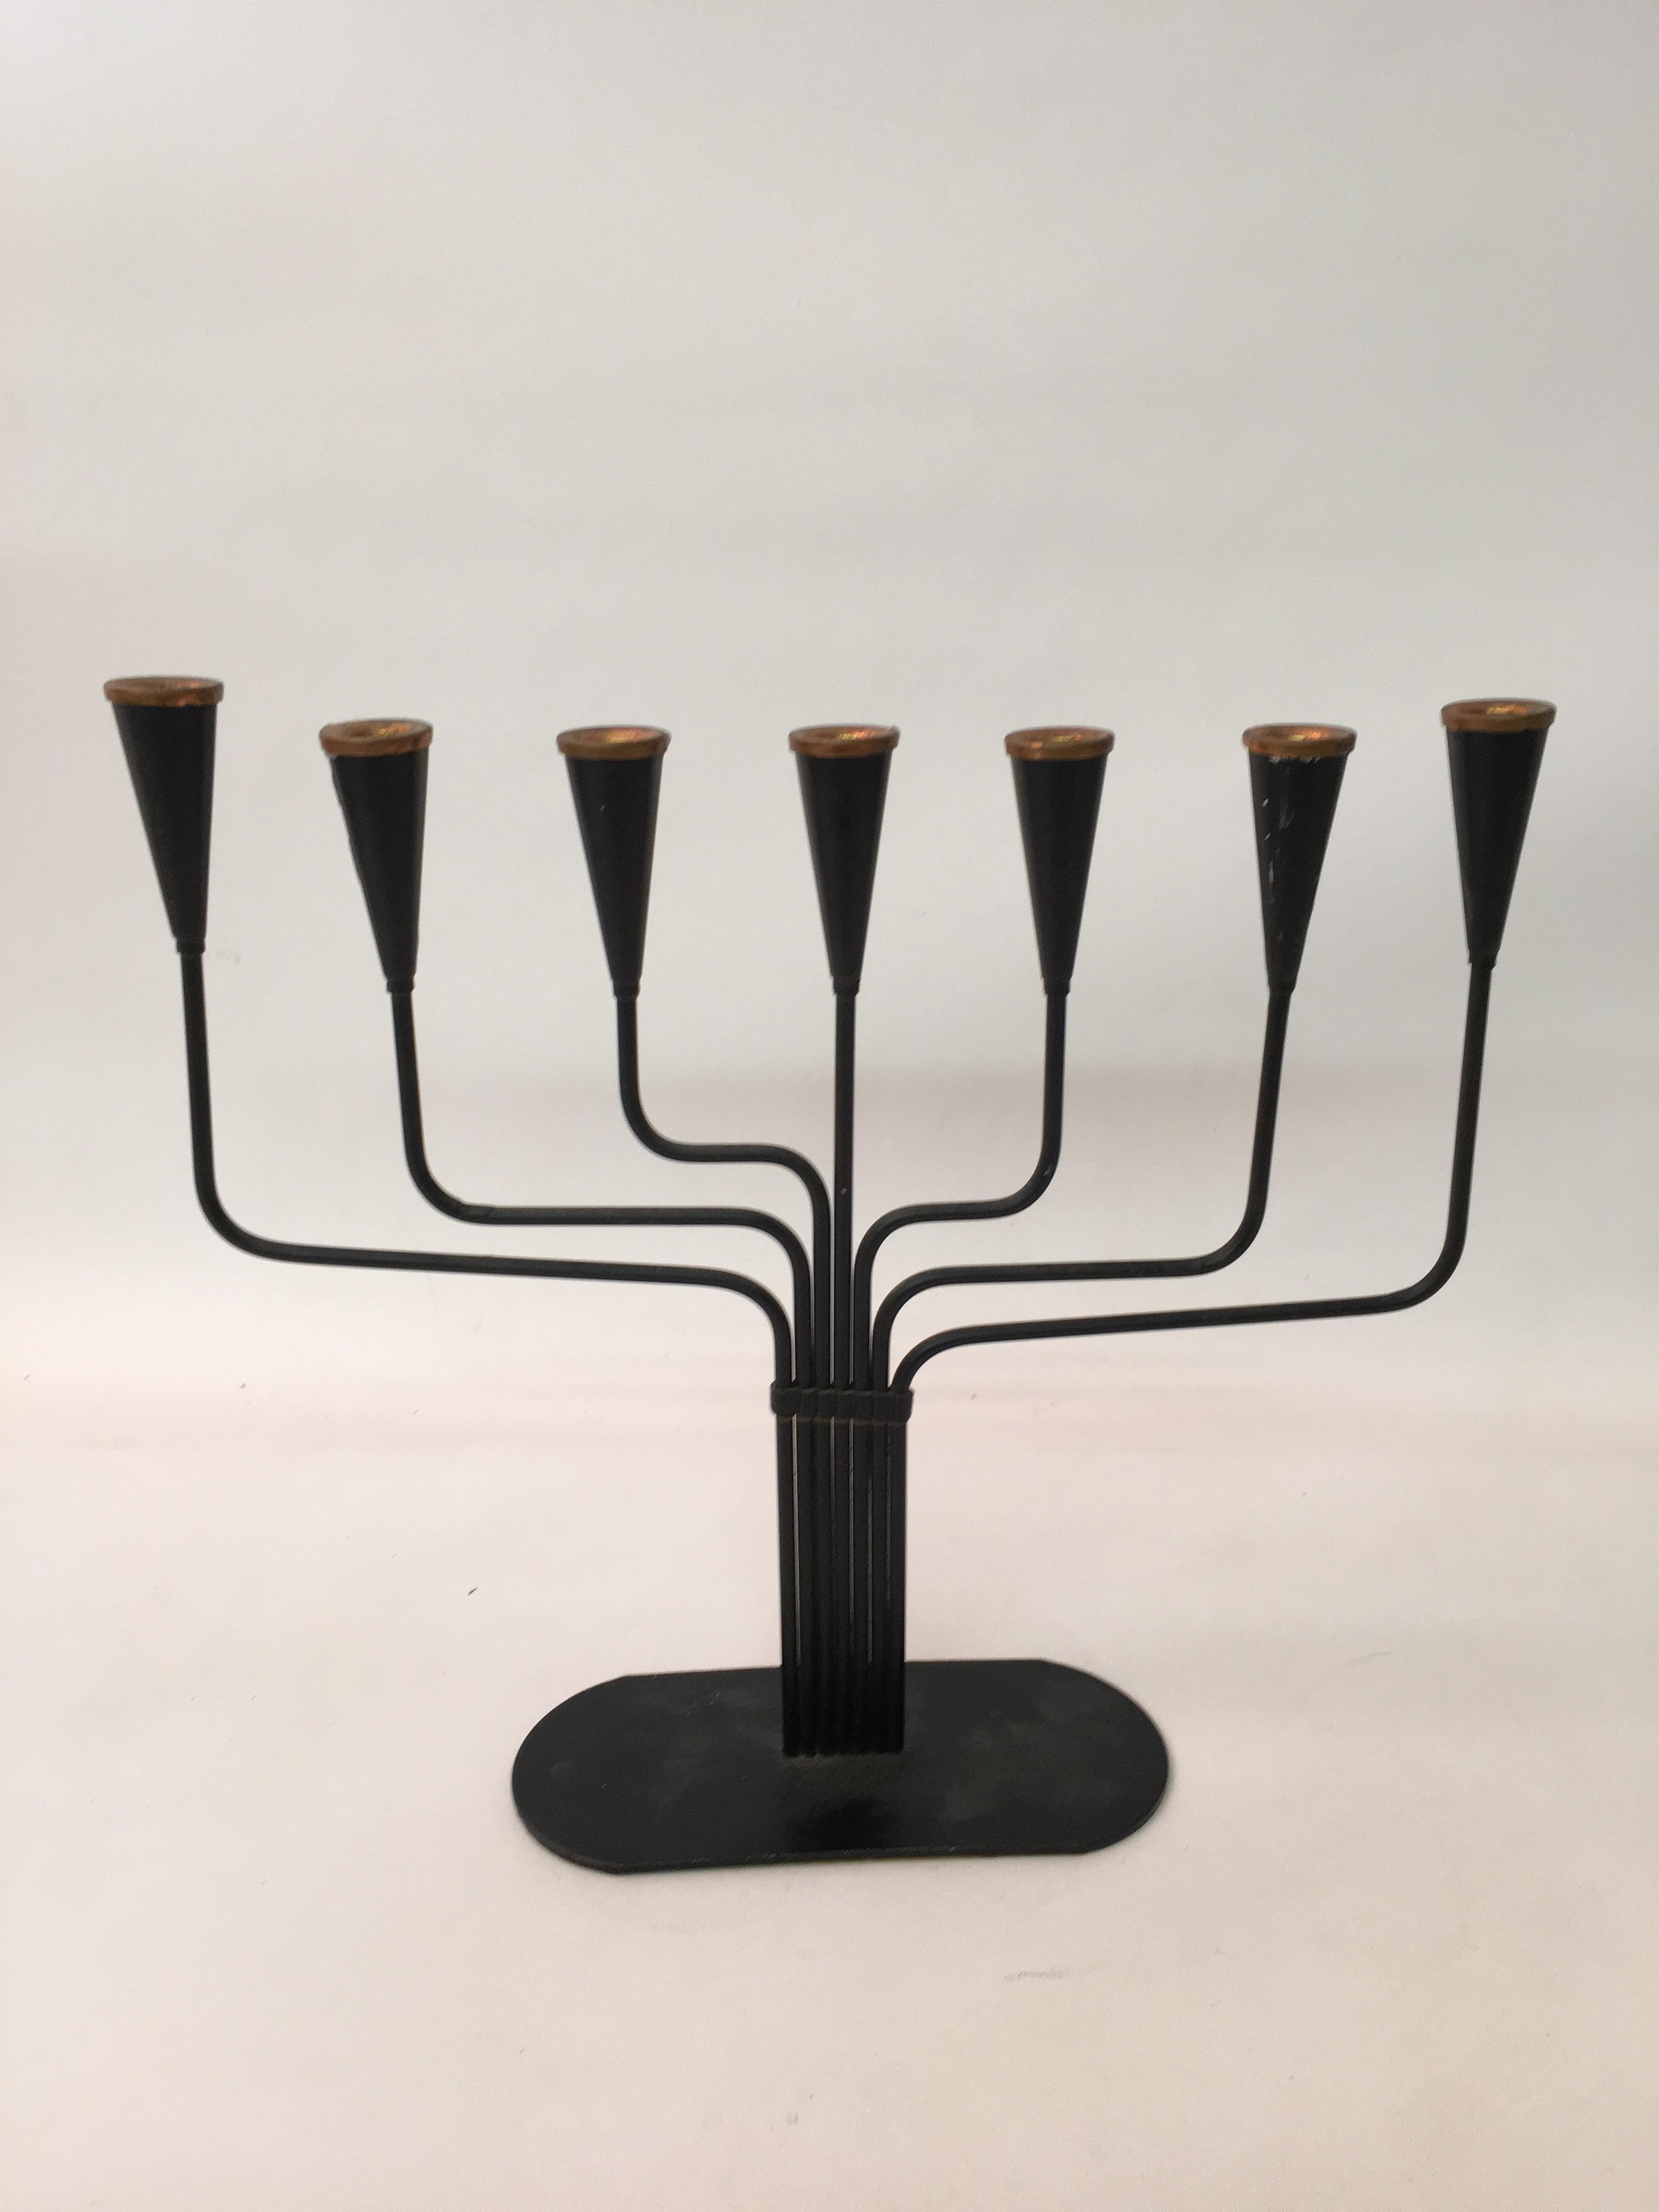 Seven taper candelabrum designed by Gunnar Ander for Ystad Metal, Sweden. Copper accents with a matte black lacquered base and felted bottom. Reminiscent of Piet Hein's variation of the Ursa Major candleholder, circa 1960.